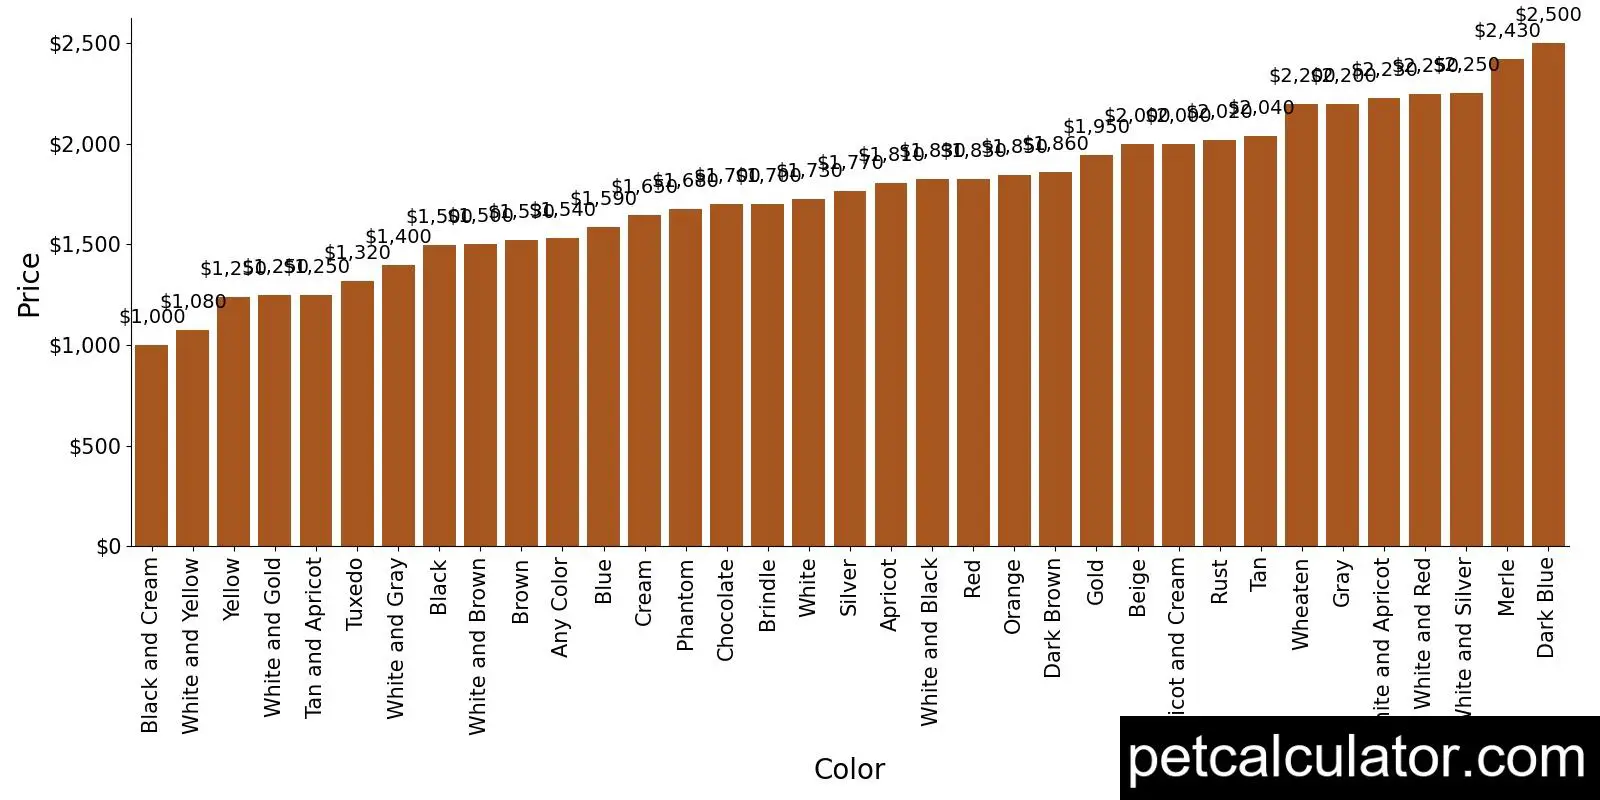 Price of Labradoodle by Color 